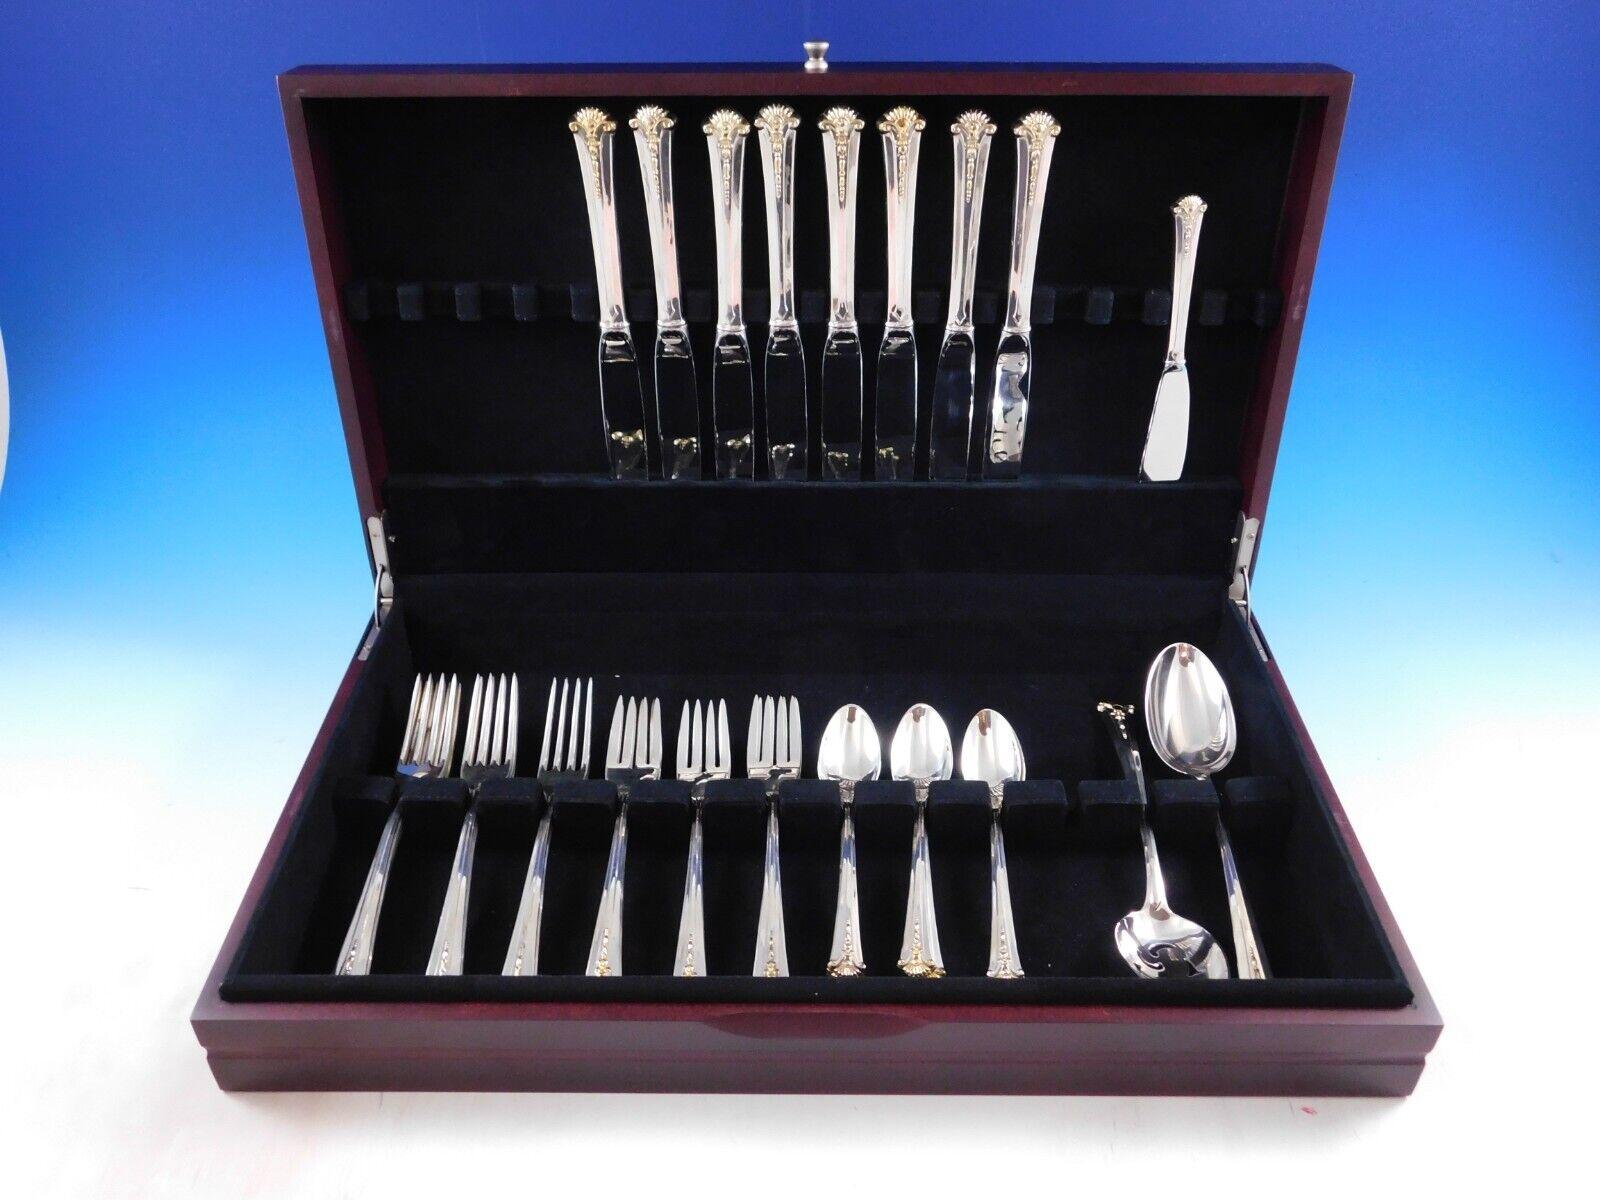 Rare Dinner Size Worthington Gold Accent by Kirk-Stieff Sterling Silver Flatware set - 35 pieces. This set includes:

8 Dinner Size Knives, 9 3/4